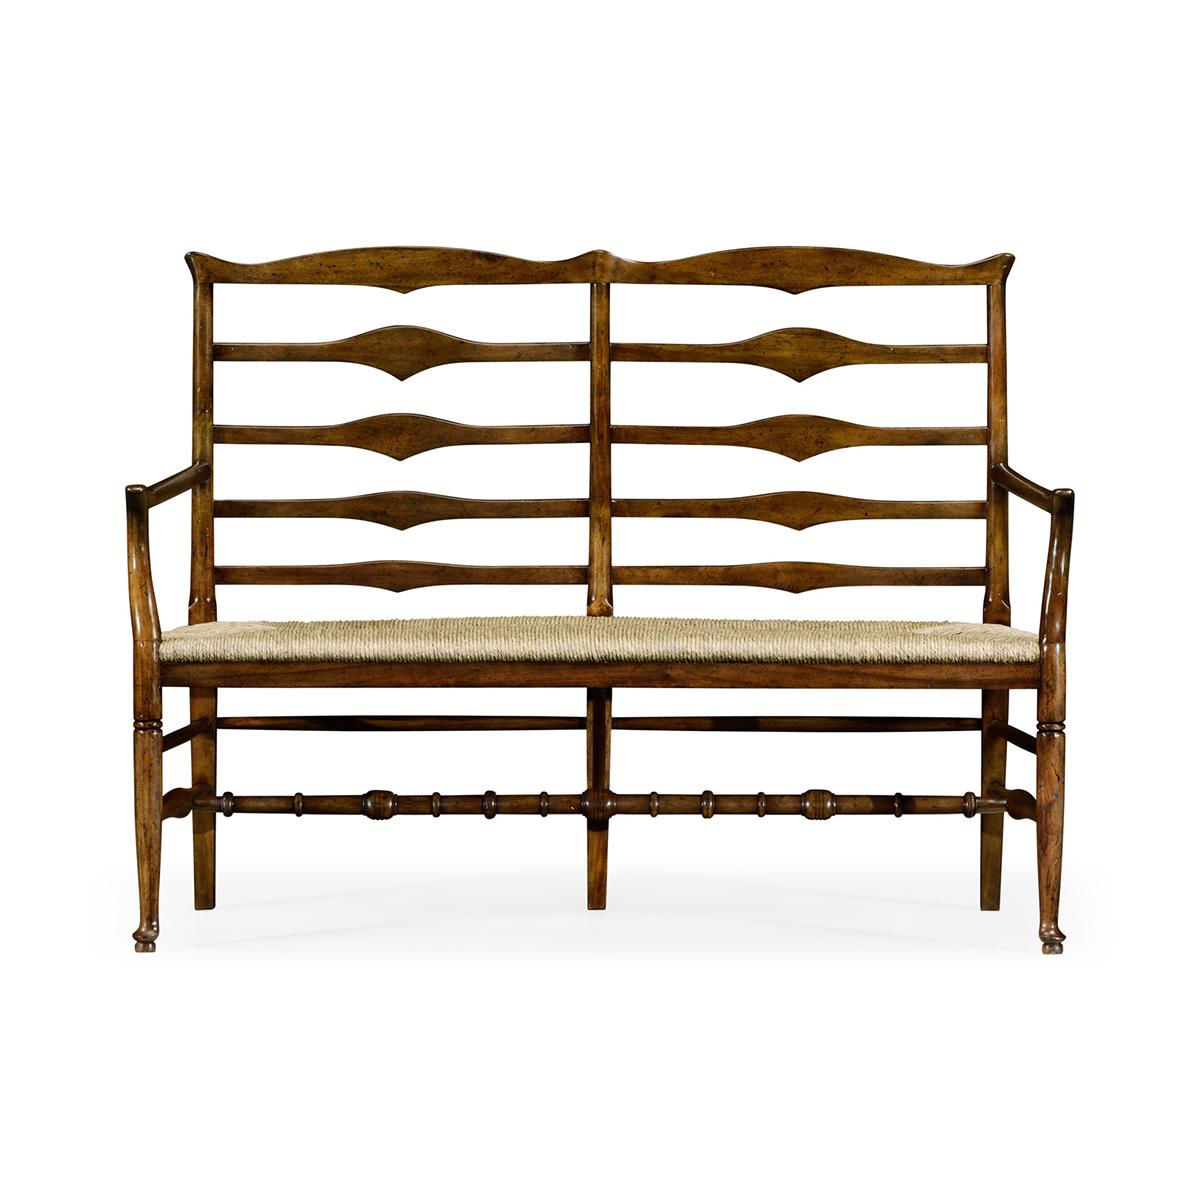 Country style walnut ladder back two seat bench with shaped back rail, graduated ladder slats with triangular shaping in the centre and rush seat. Turned legs and stretchers beneath.

Dimensions: 54.75